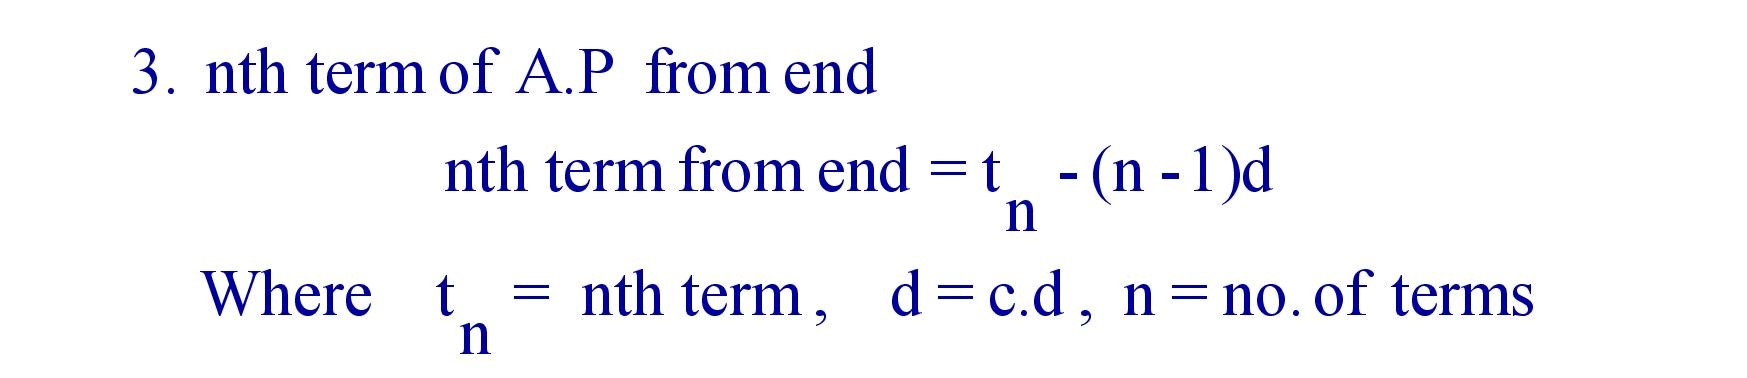 nth term of A.P from end